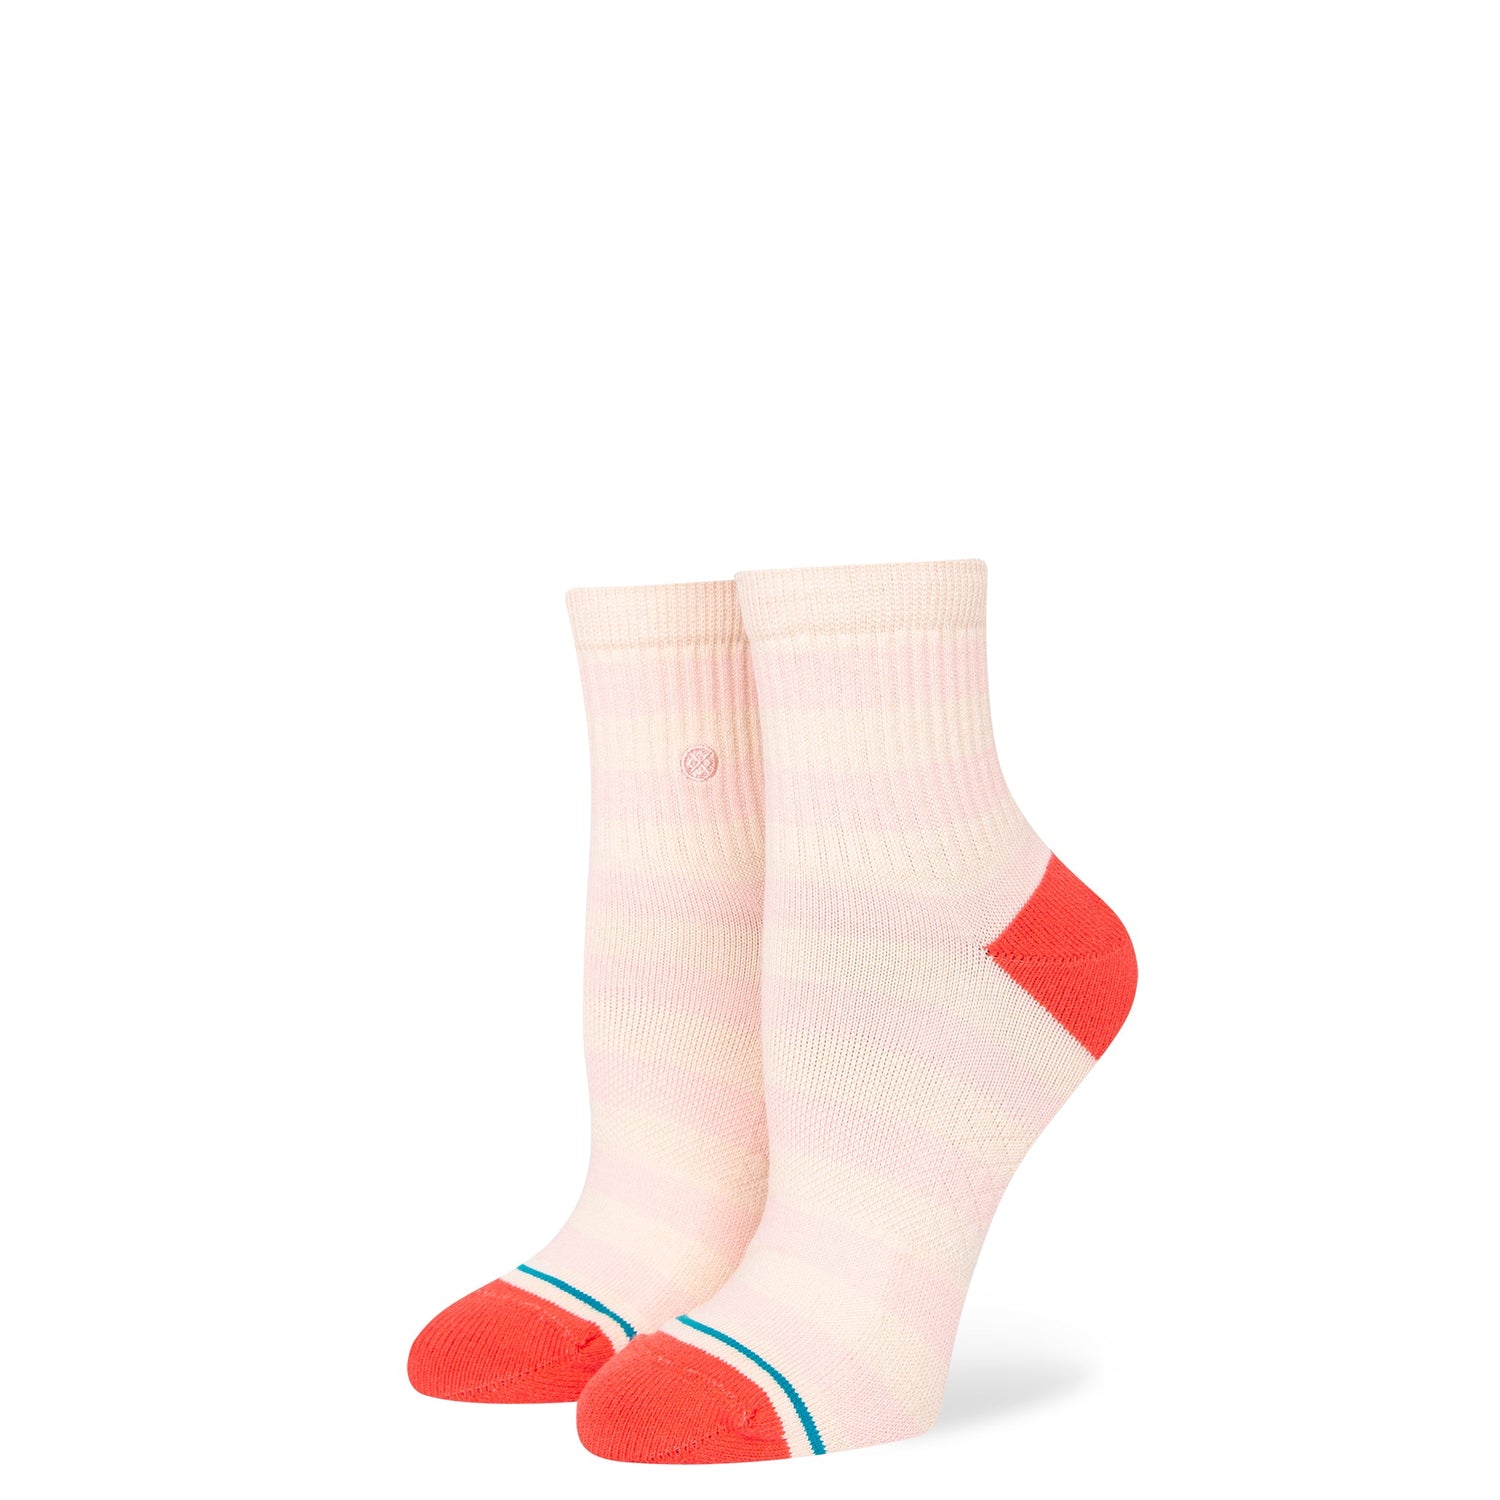 Chaussettes basses pêche Anything de Stance